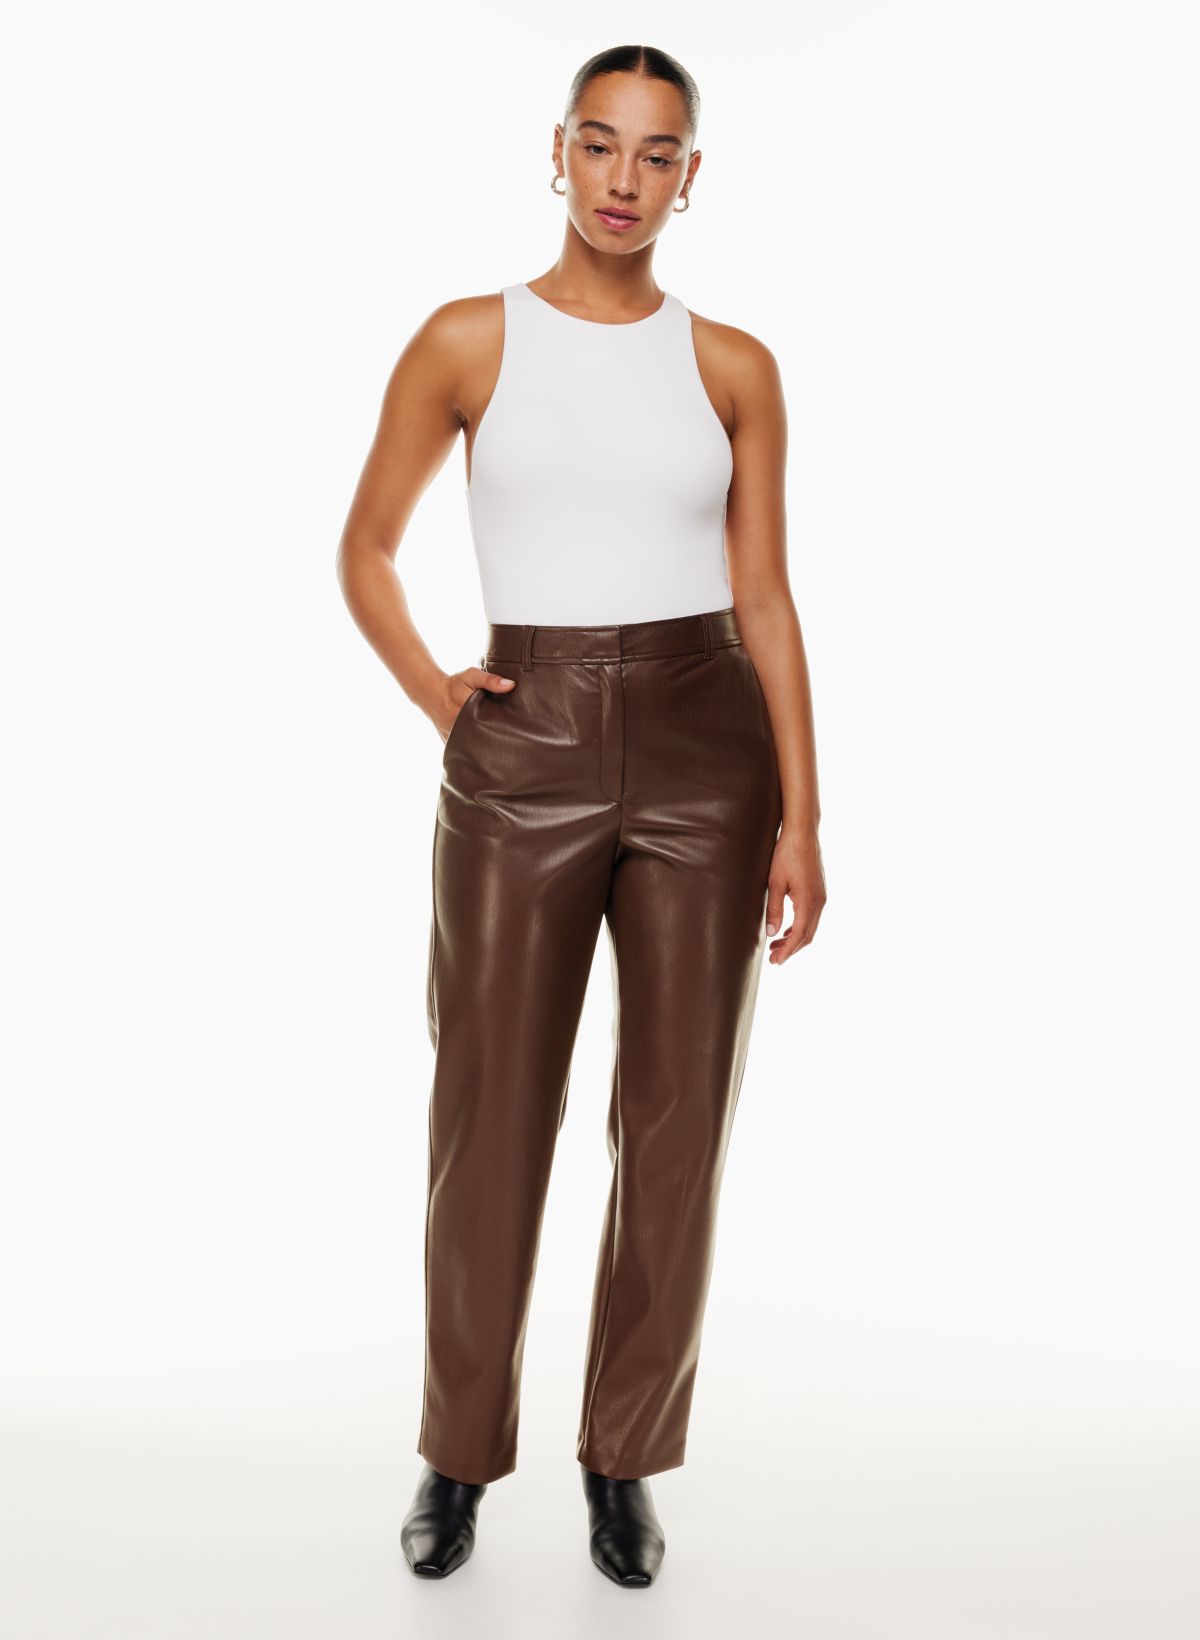 Let's chat midsize fall outfits for work. I love leather pants or trou, mid size outfits